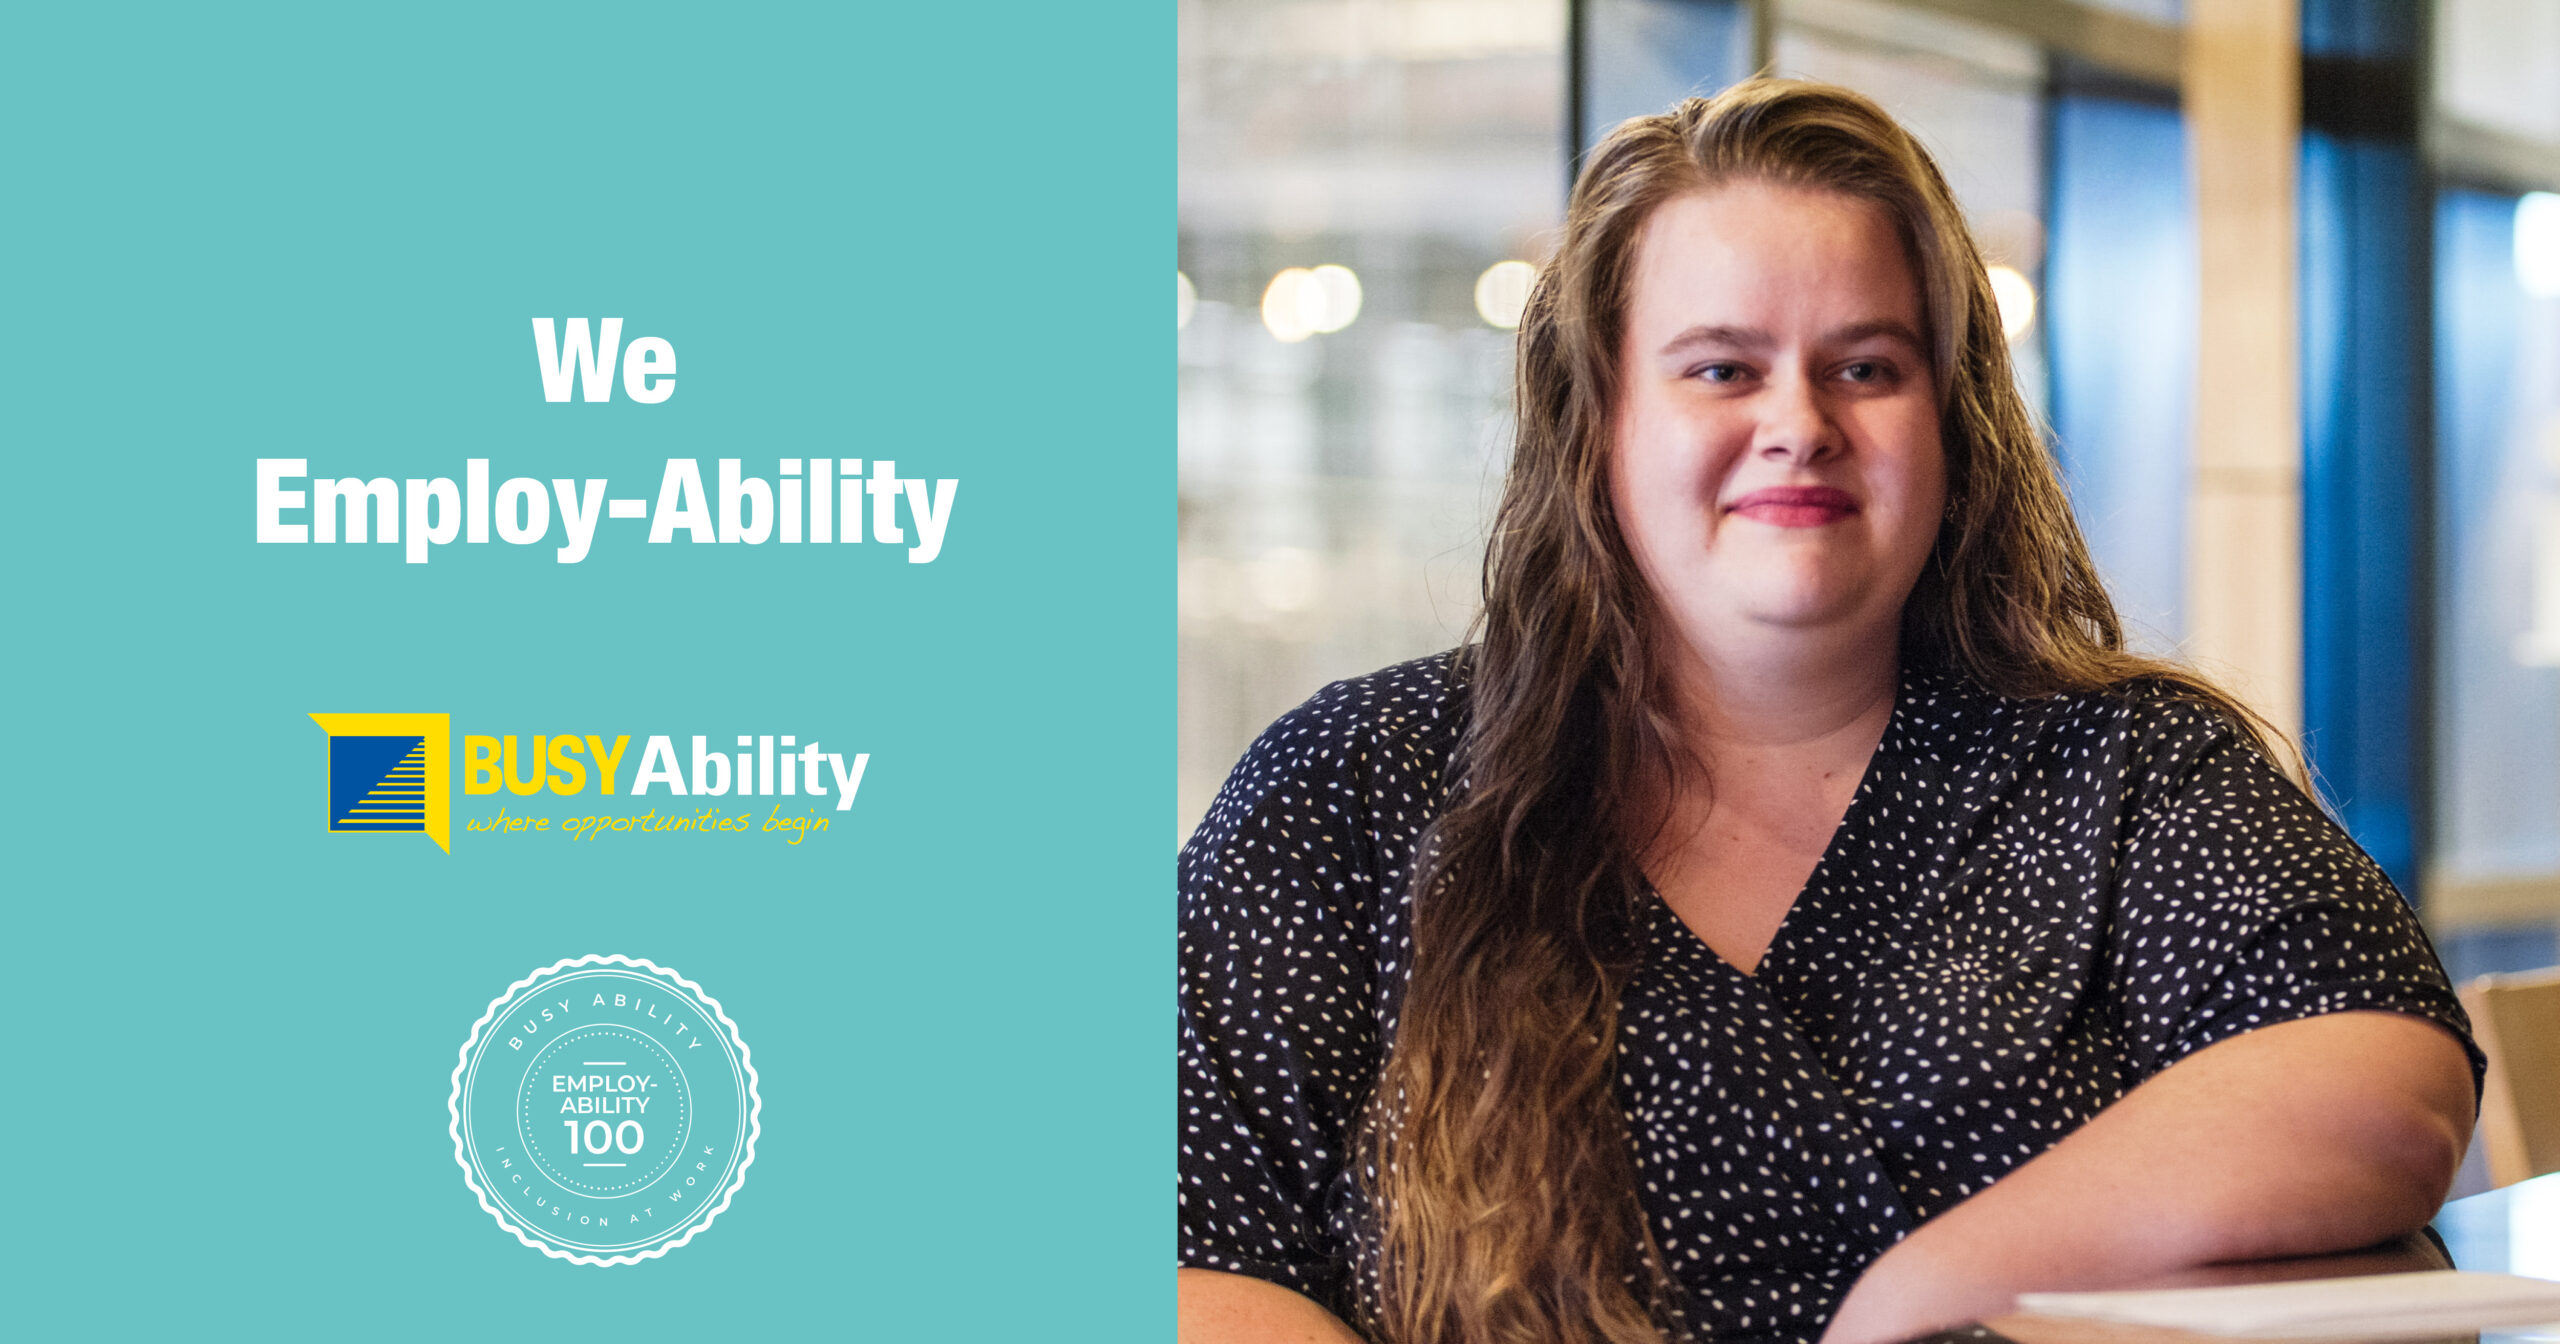 National Skills Week – Let’s Reassess Skills Based on Ability